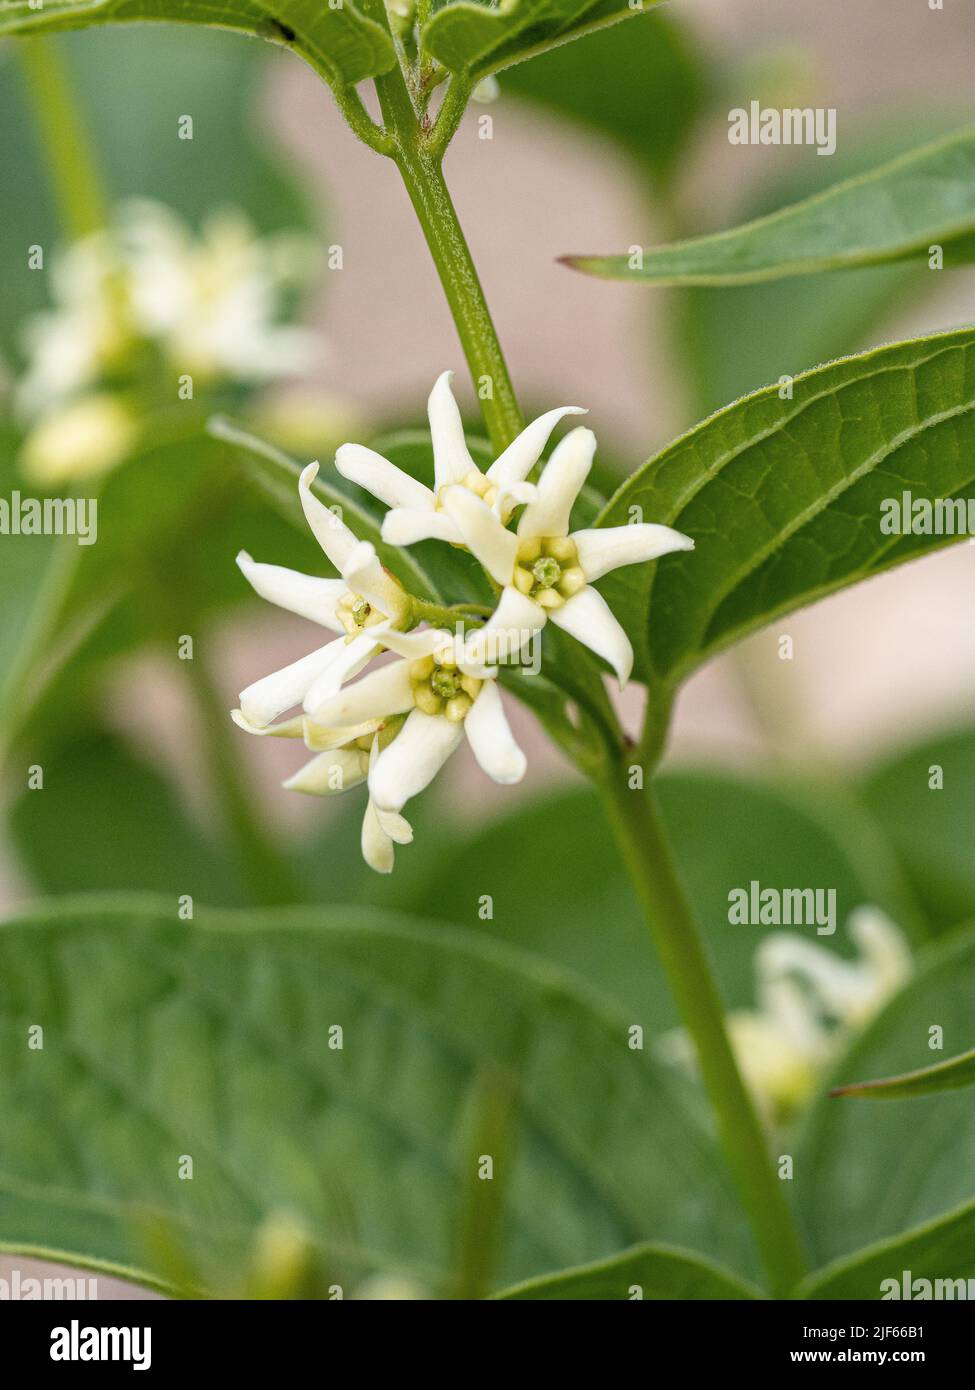 A close up of the delicate white starry flowers of Vincetoxicum hirundinaria Stock Photo